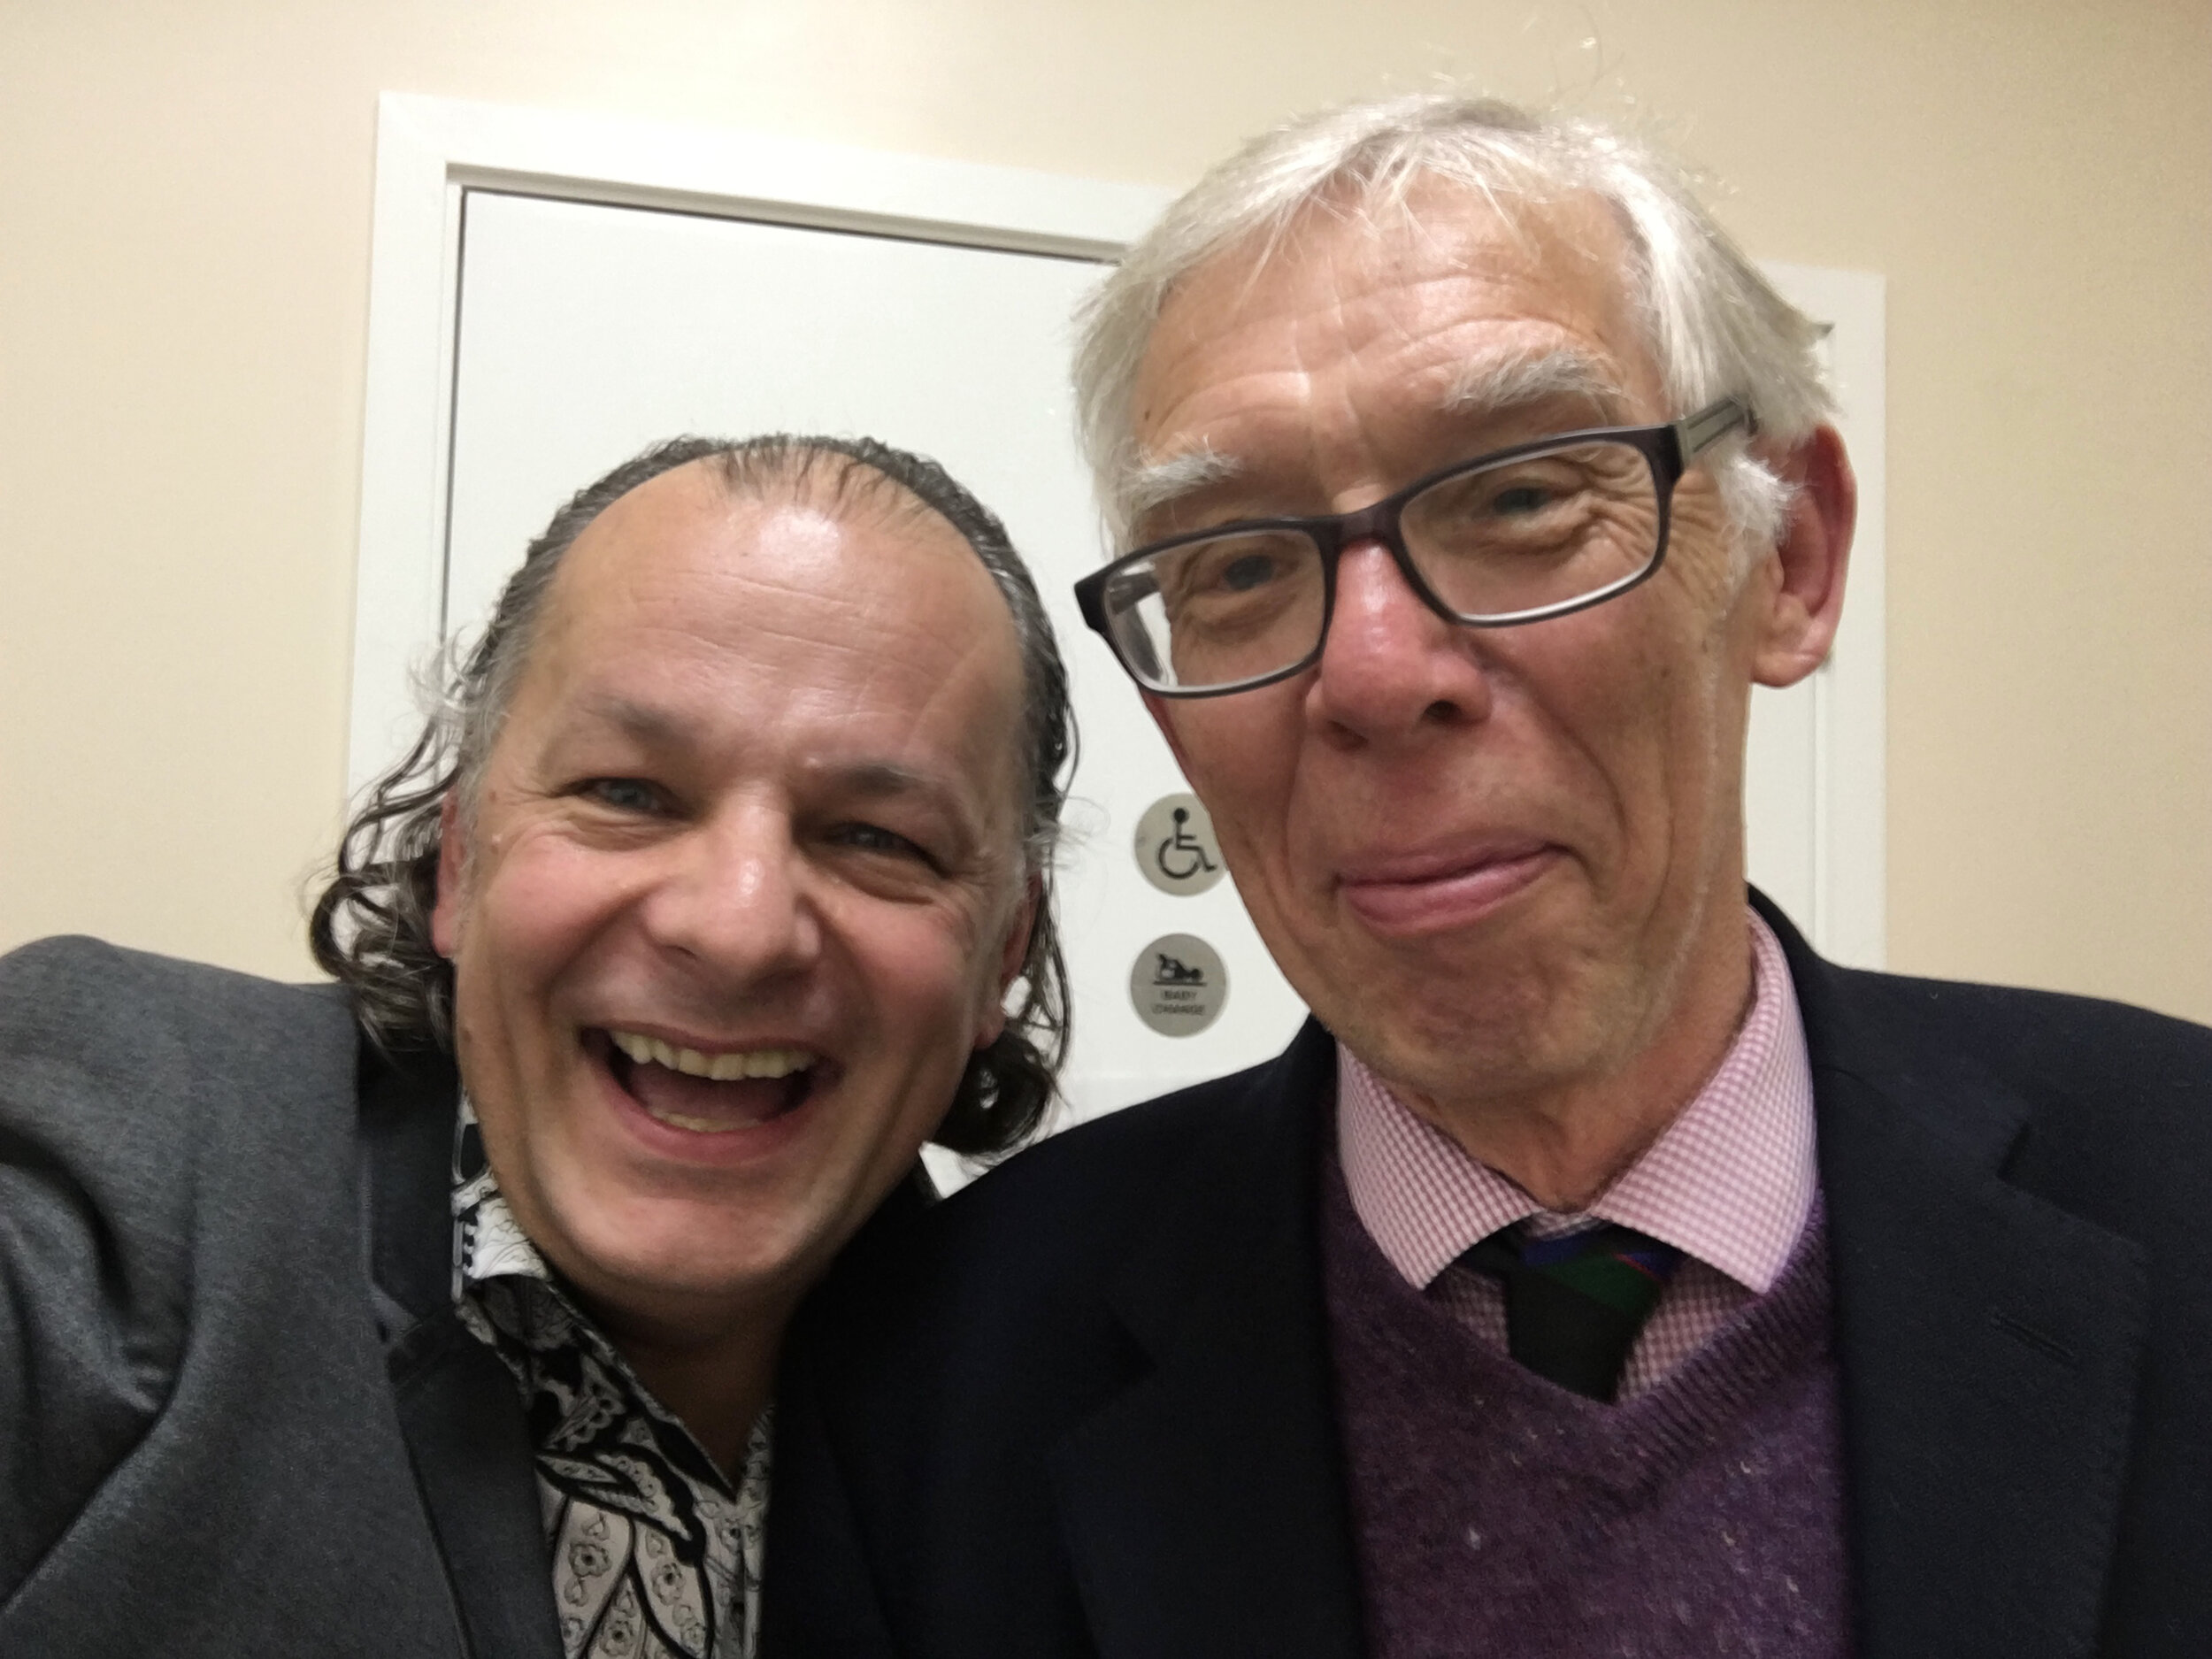 With colleague Michael Skinner at Royal College of Music, London